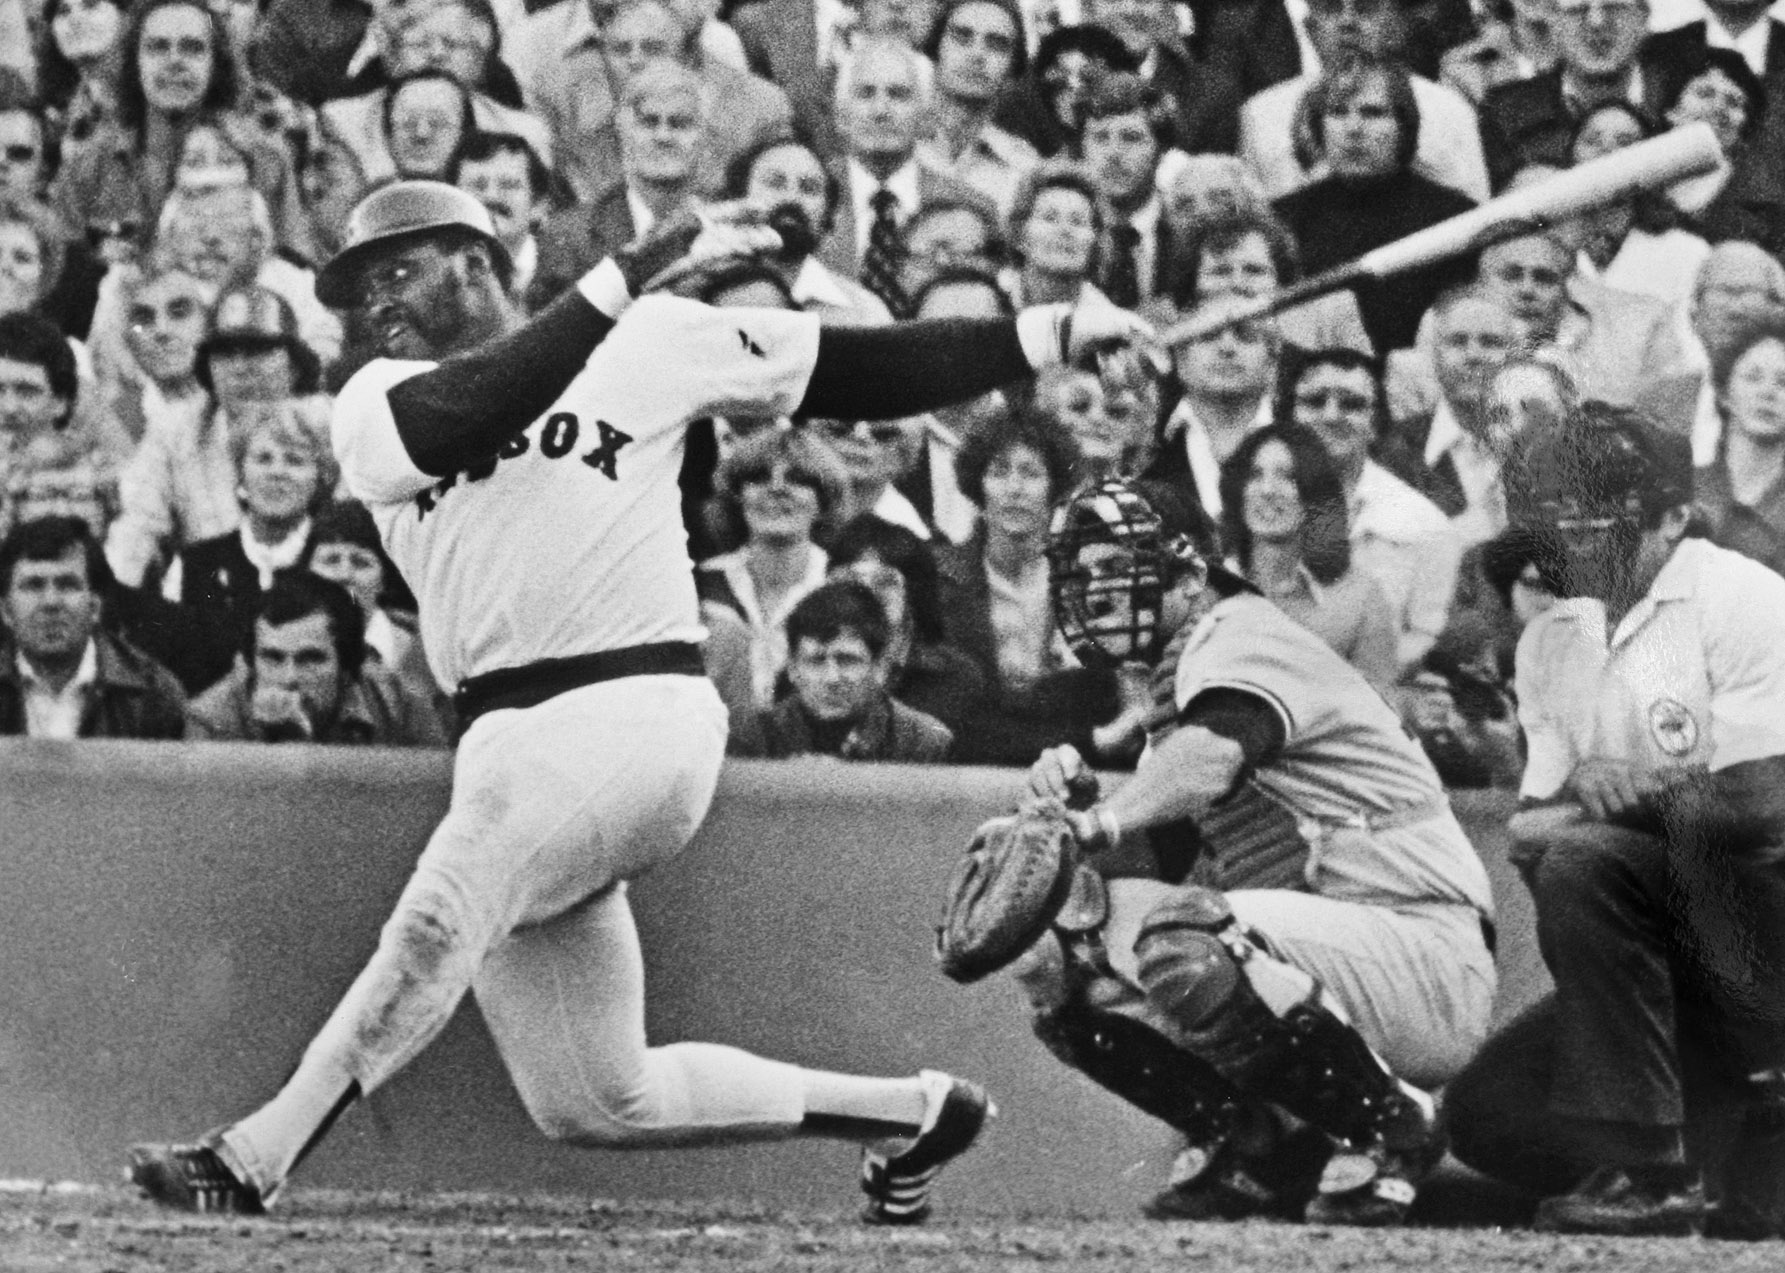 He was definitely a legend.' Red Sox star George 'Boomer' Scott's son keeps  legacy alive years after his death - The Boston Globe